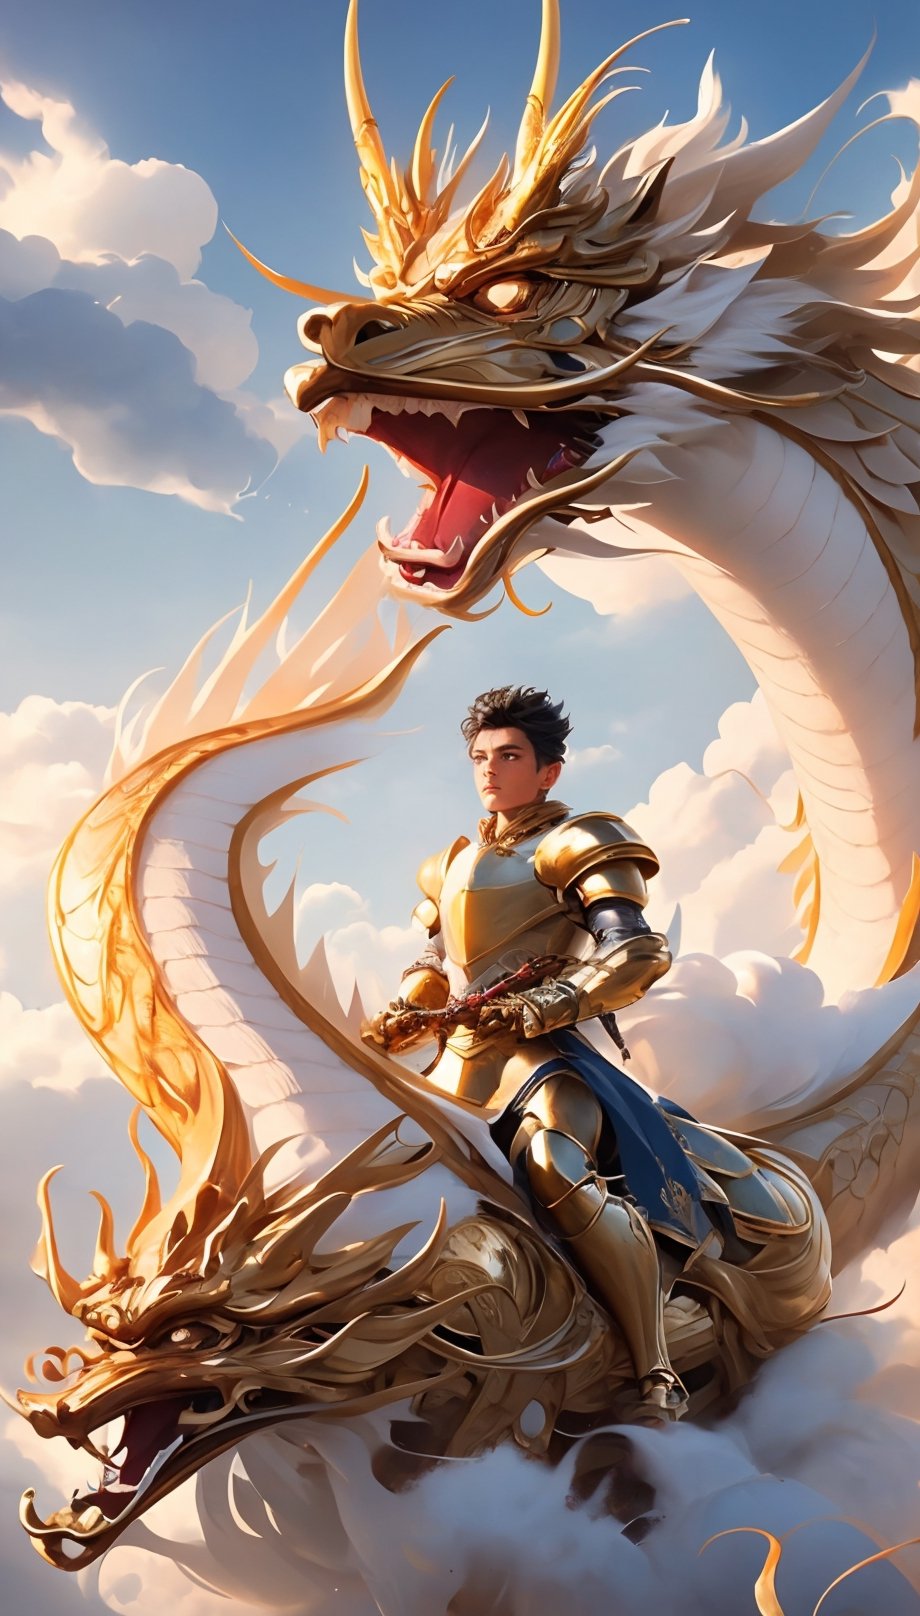 short black hair, thick eyebrows, soft, a golden dragon, mythology, medieval, fantasy, young, Asian men, masculine, manly, dark fantasy, high fantasy, gold armor, defined jawline, red eyes, handsome male, facing in front, photorealistic, 8k, cinematic lighting, very dramatic, soft aesthetic, innocent, ((A man wearing golden metal plate armor walks on a golden dragon against a background surrounded by clouds)), (Lightning twines around),